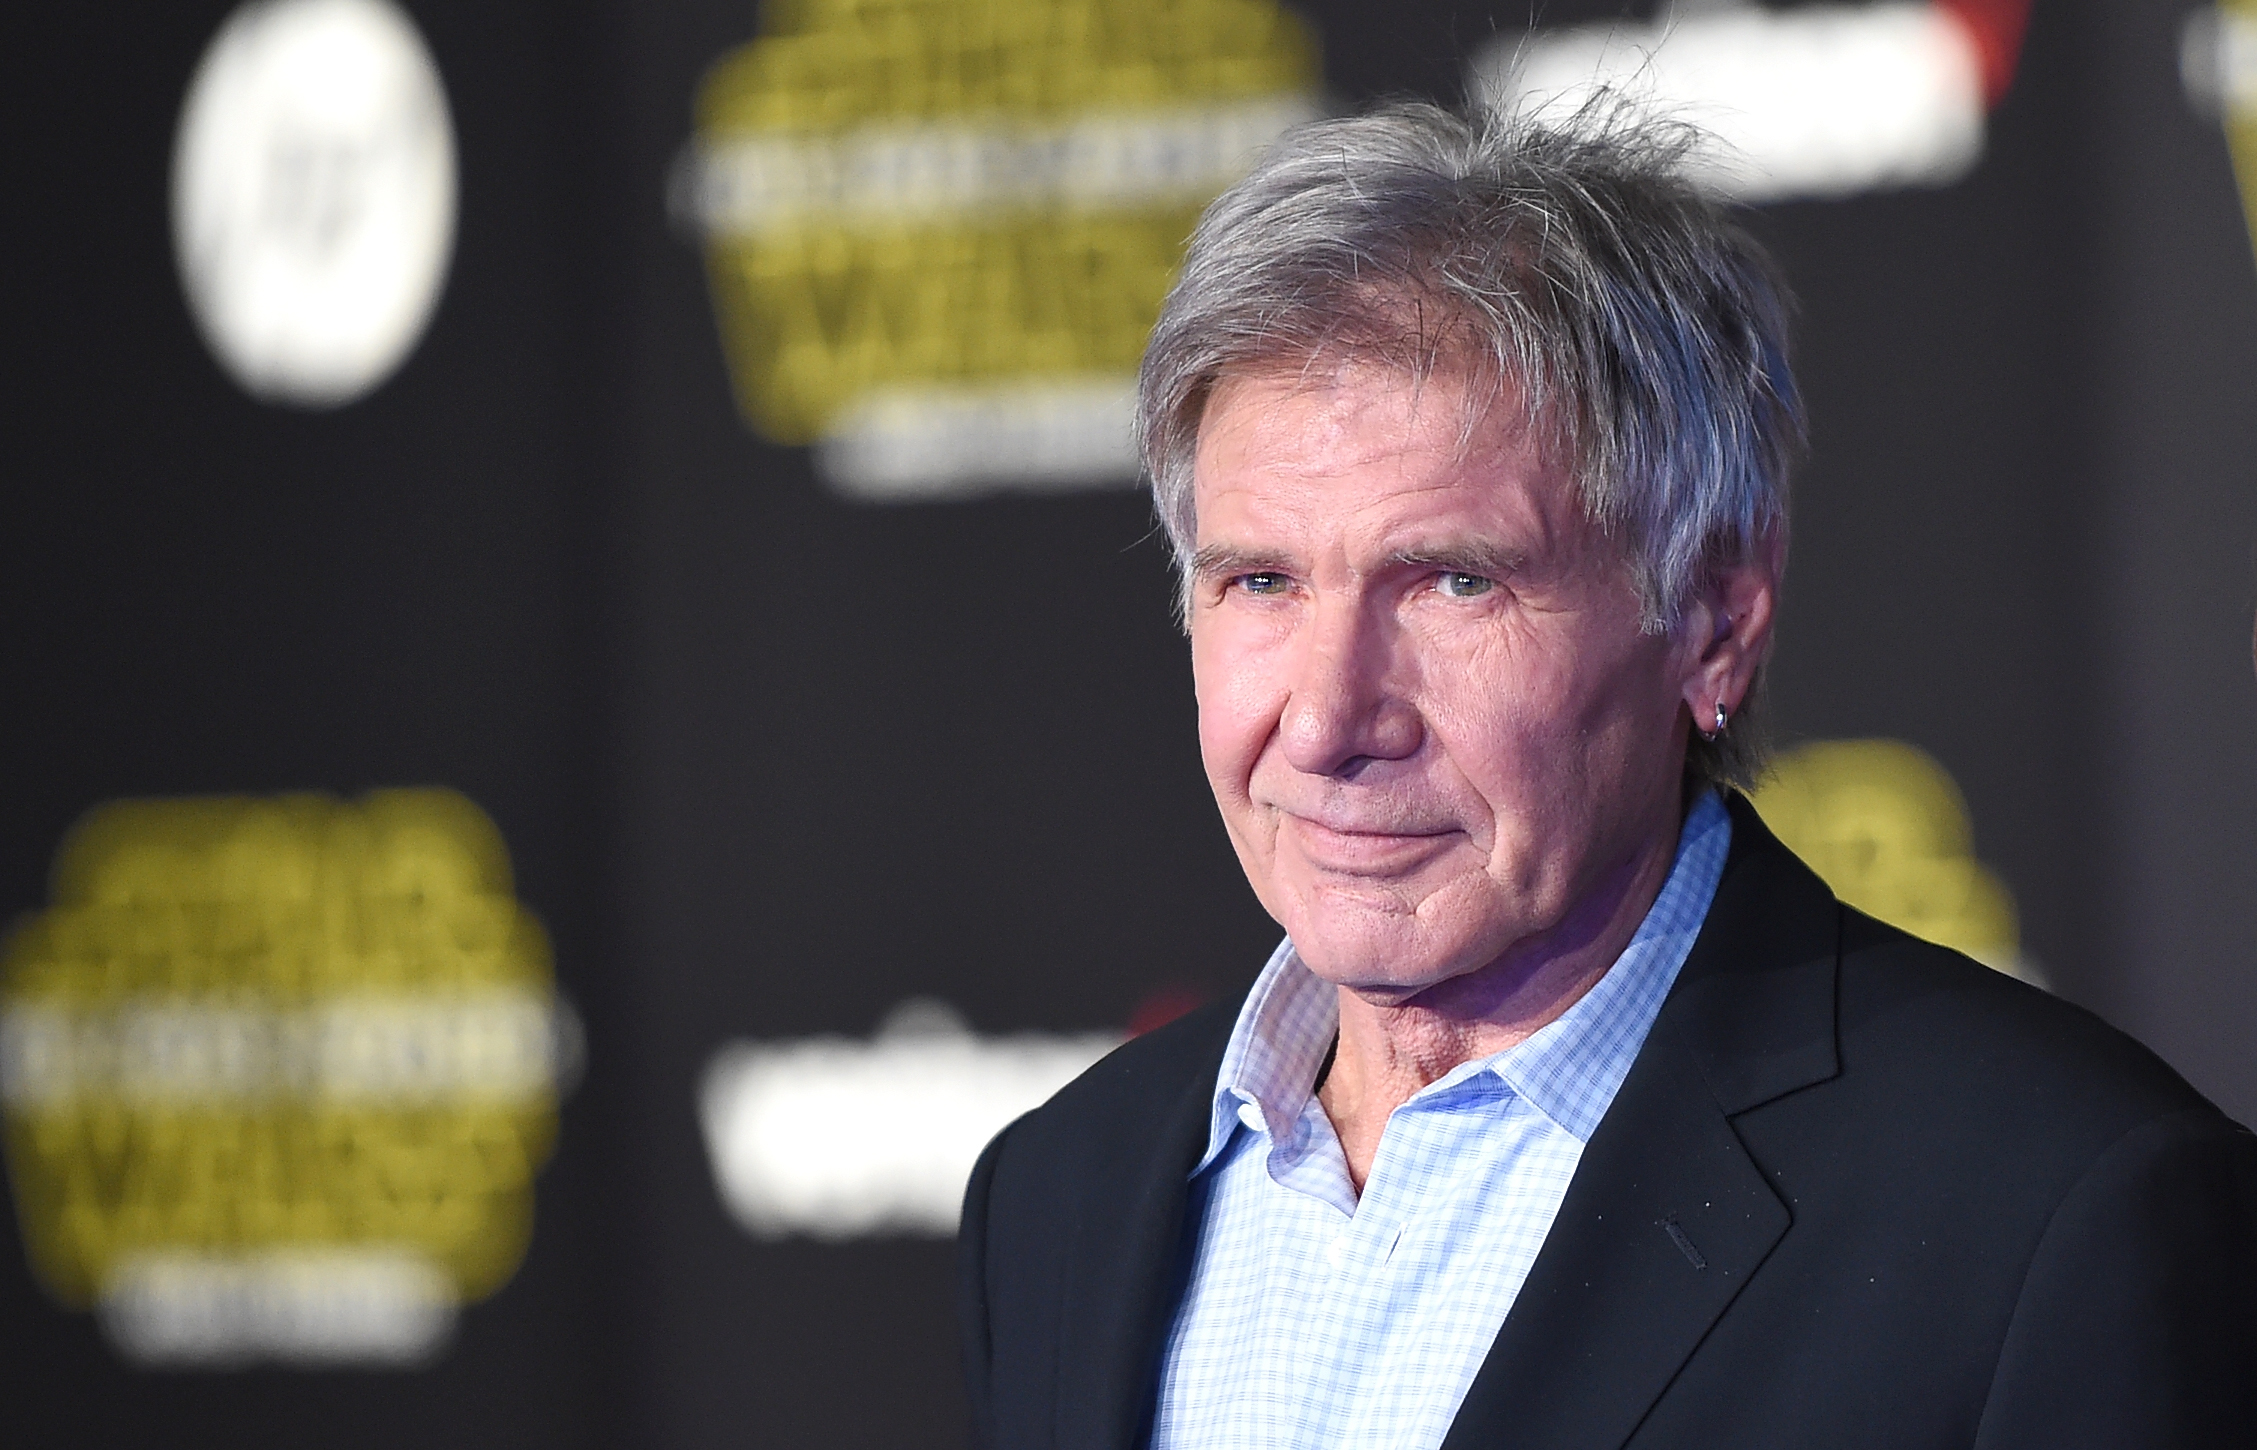 Actor Harrison Ford attends the Premiere of Walt Disney Pictures and Lucasfilm's 'Star Wars: The Force Awakens' on December 14, 2015 in Hollywood, Calif.